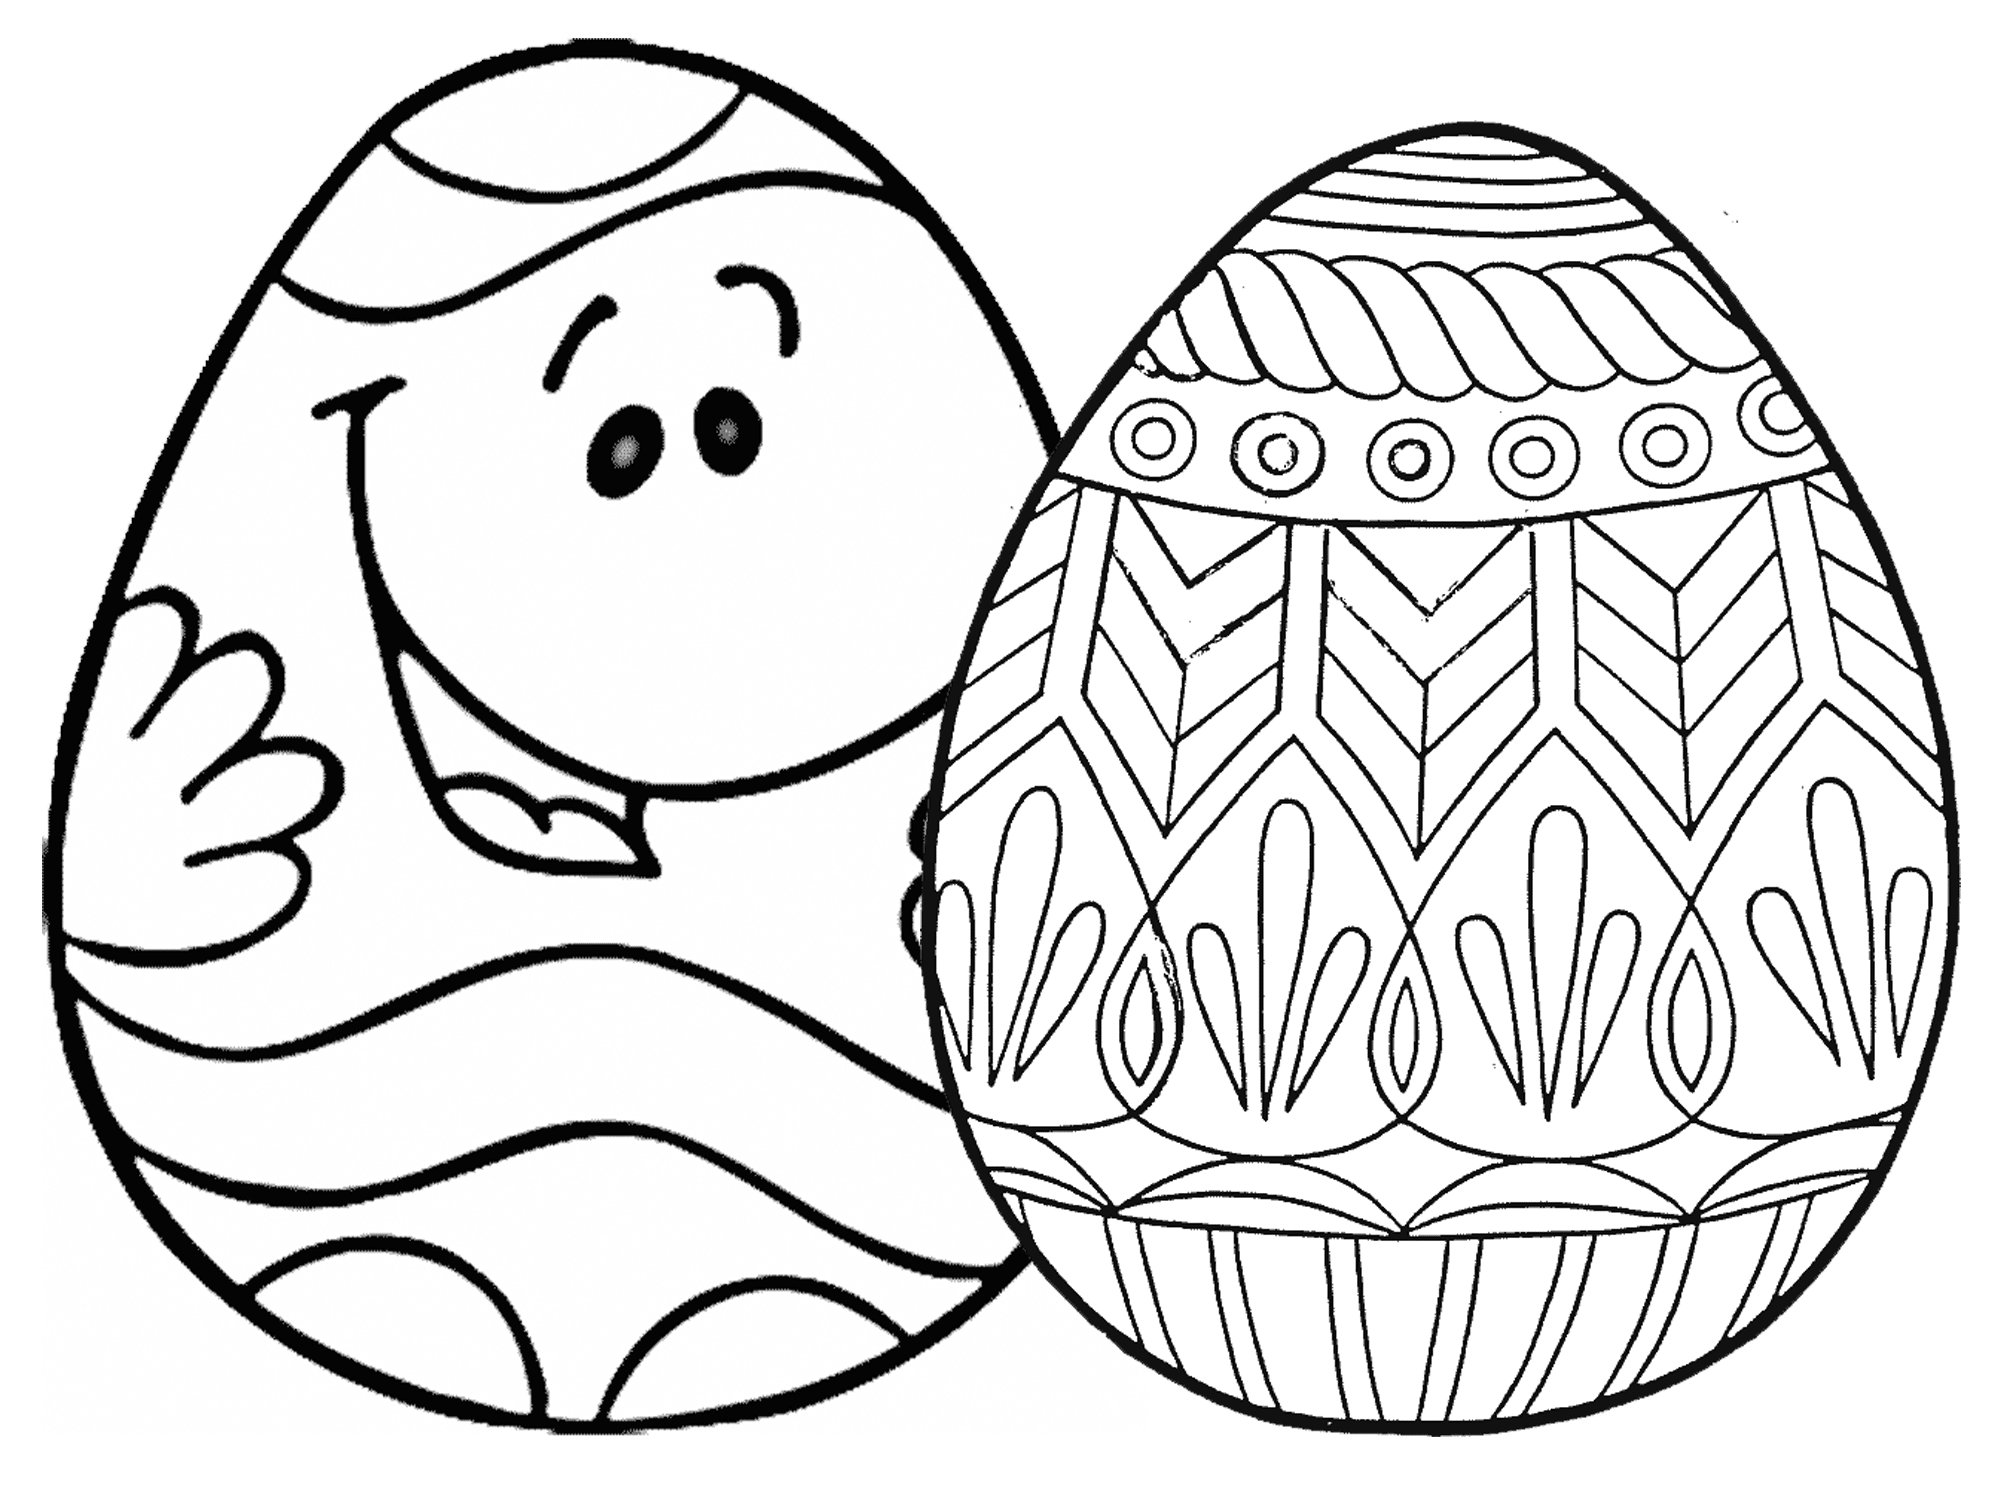 Download Dragon Egg Coloring Pages at GetDrawings.com | Free for ...